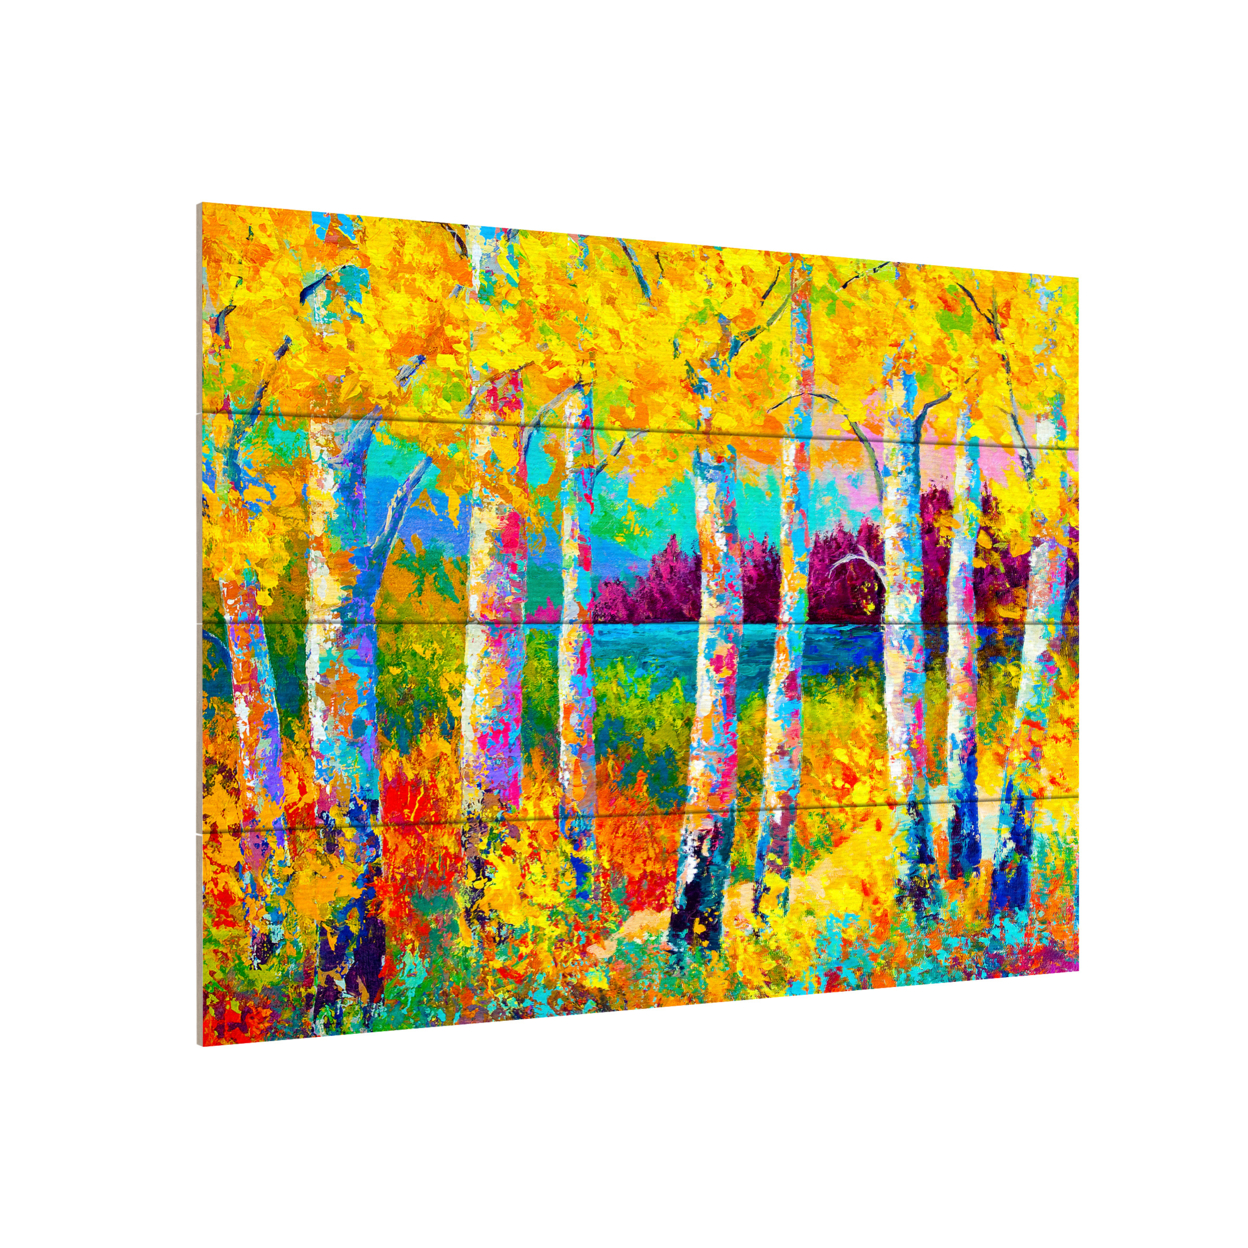 Wall Art 12 X 16 Inches Titled Autumn Jewels Ready To Hang Printed On Wooden Planks